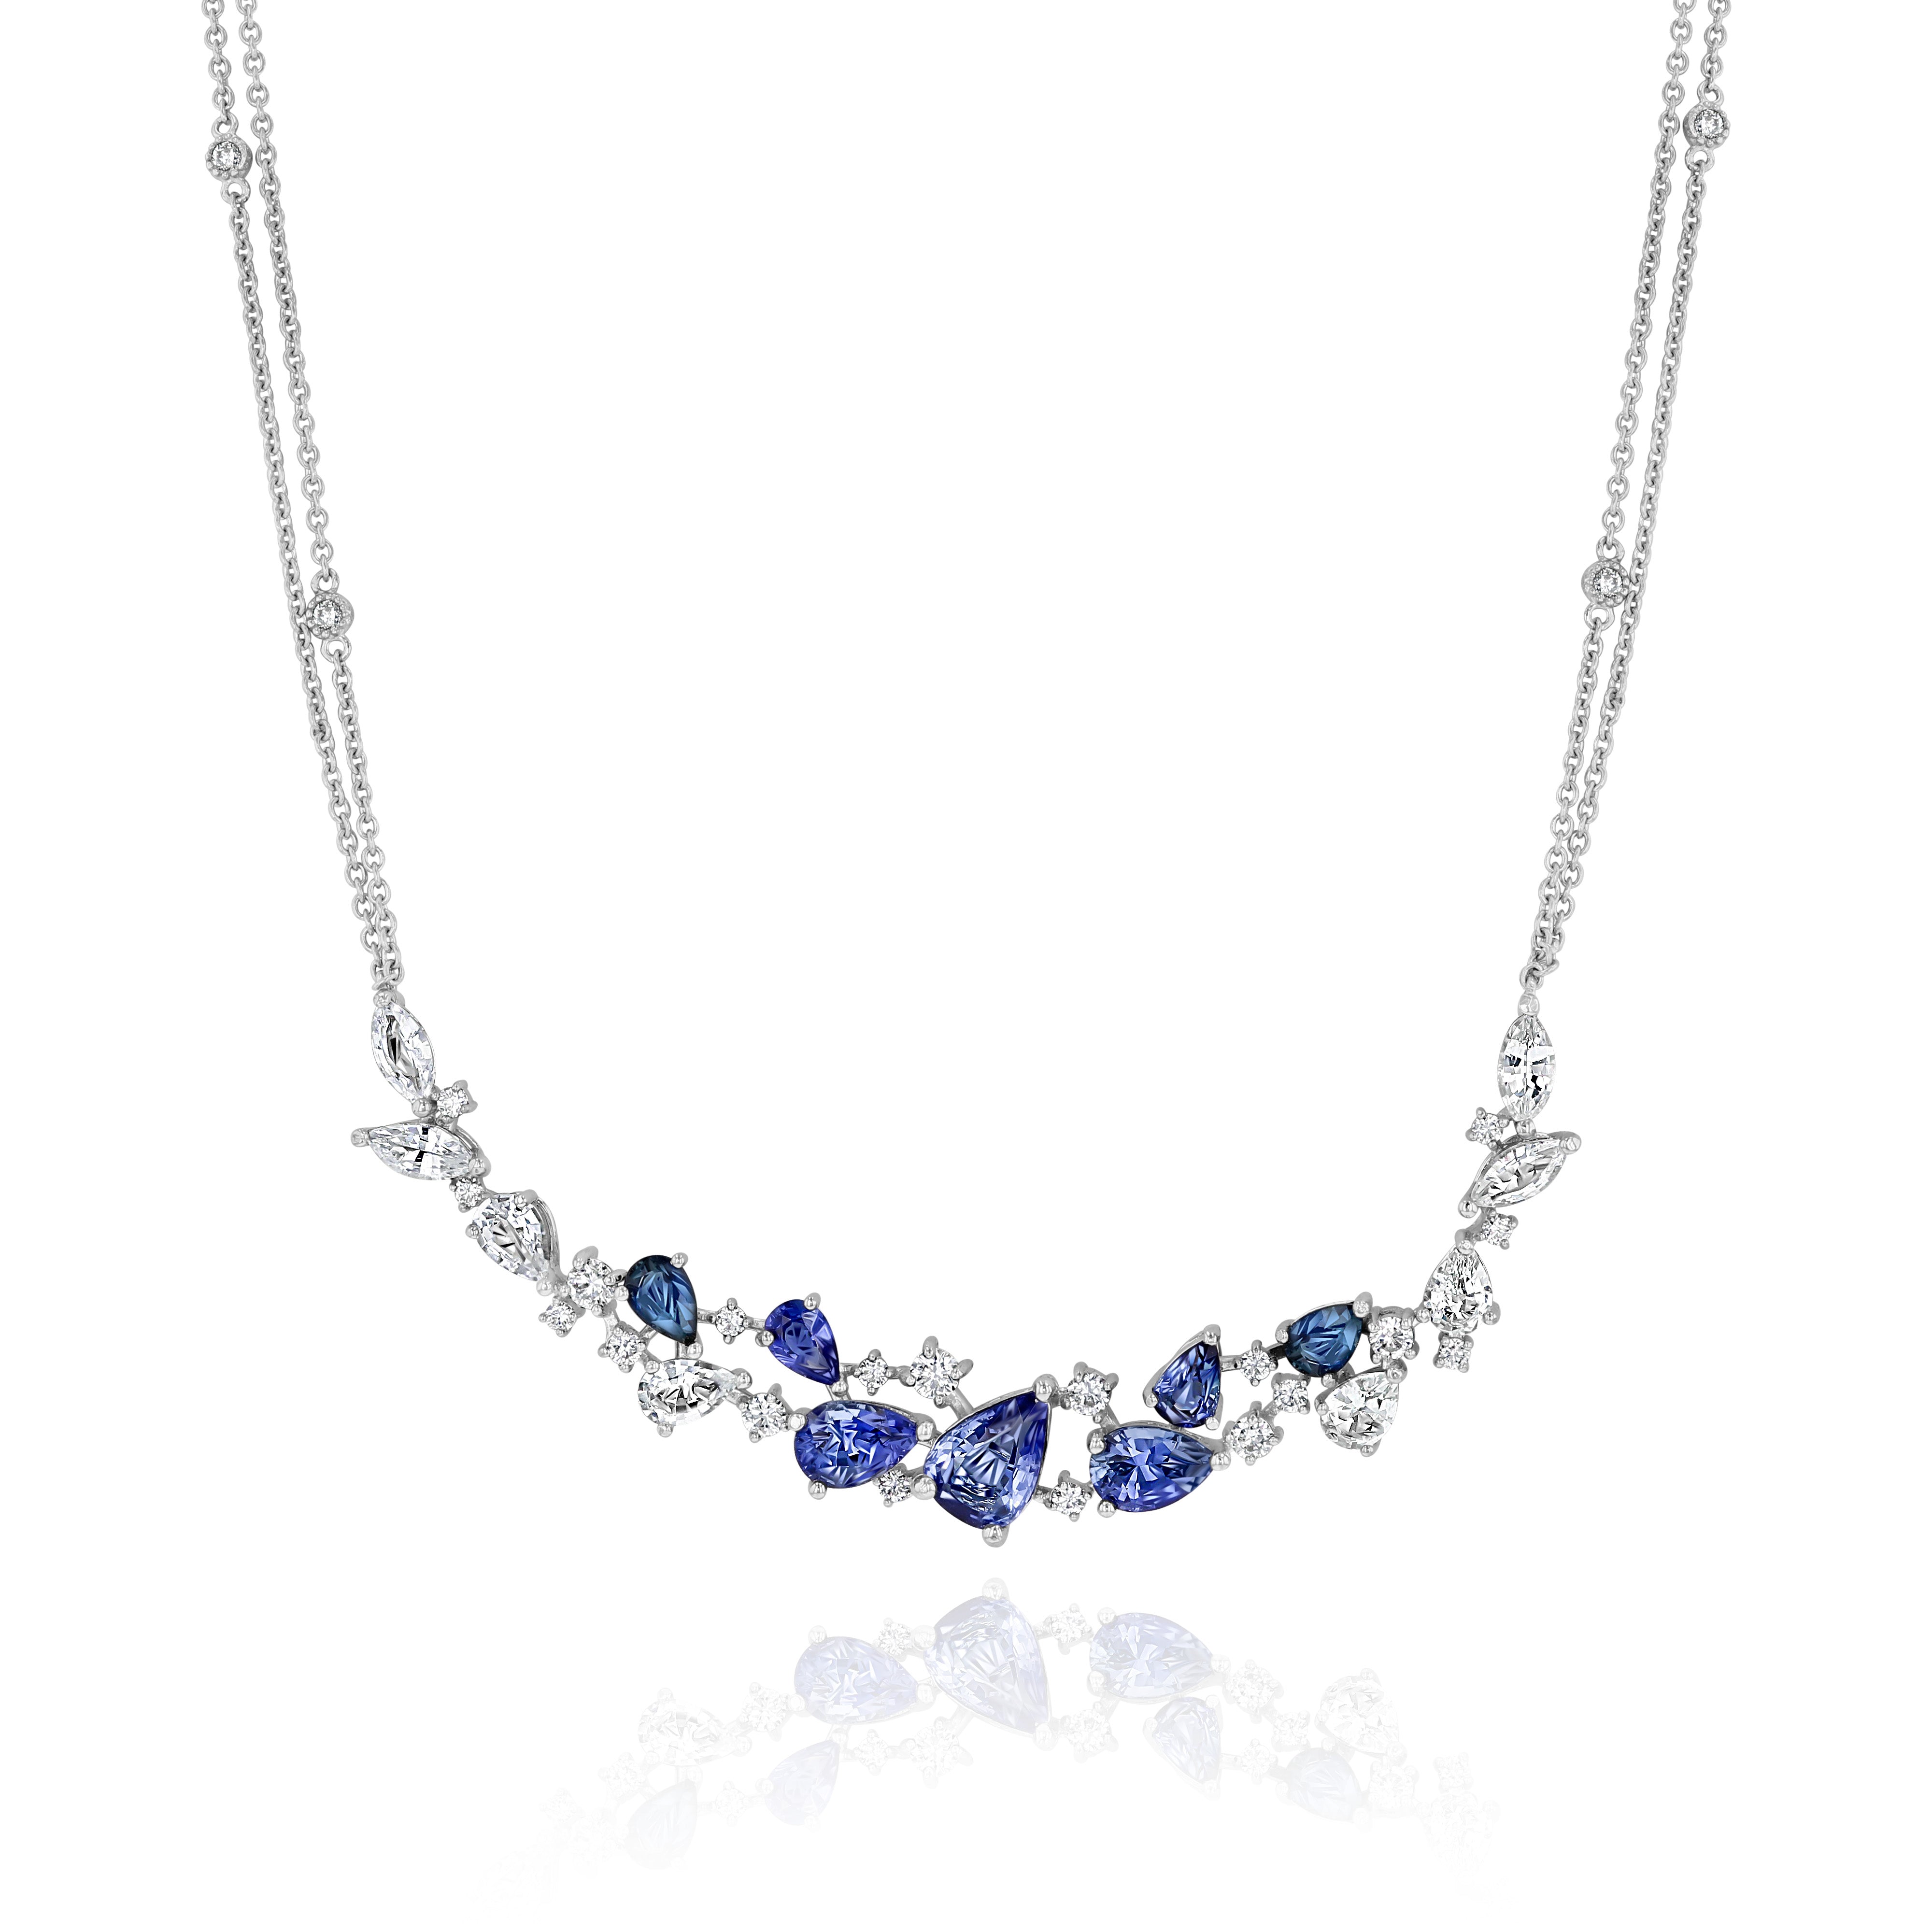 White Gold Necklace with Blue and White Sapphires, and Diamonds, Medium